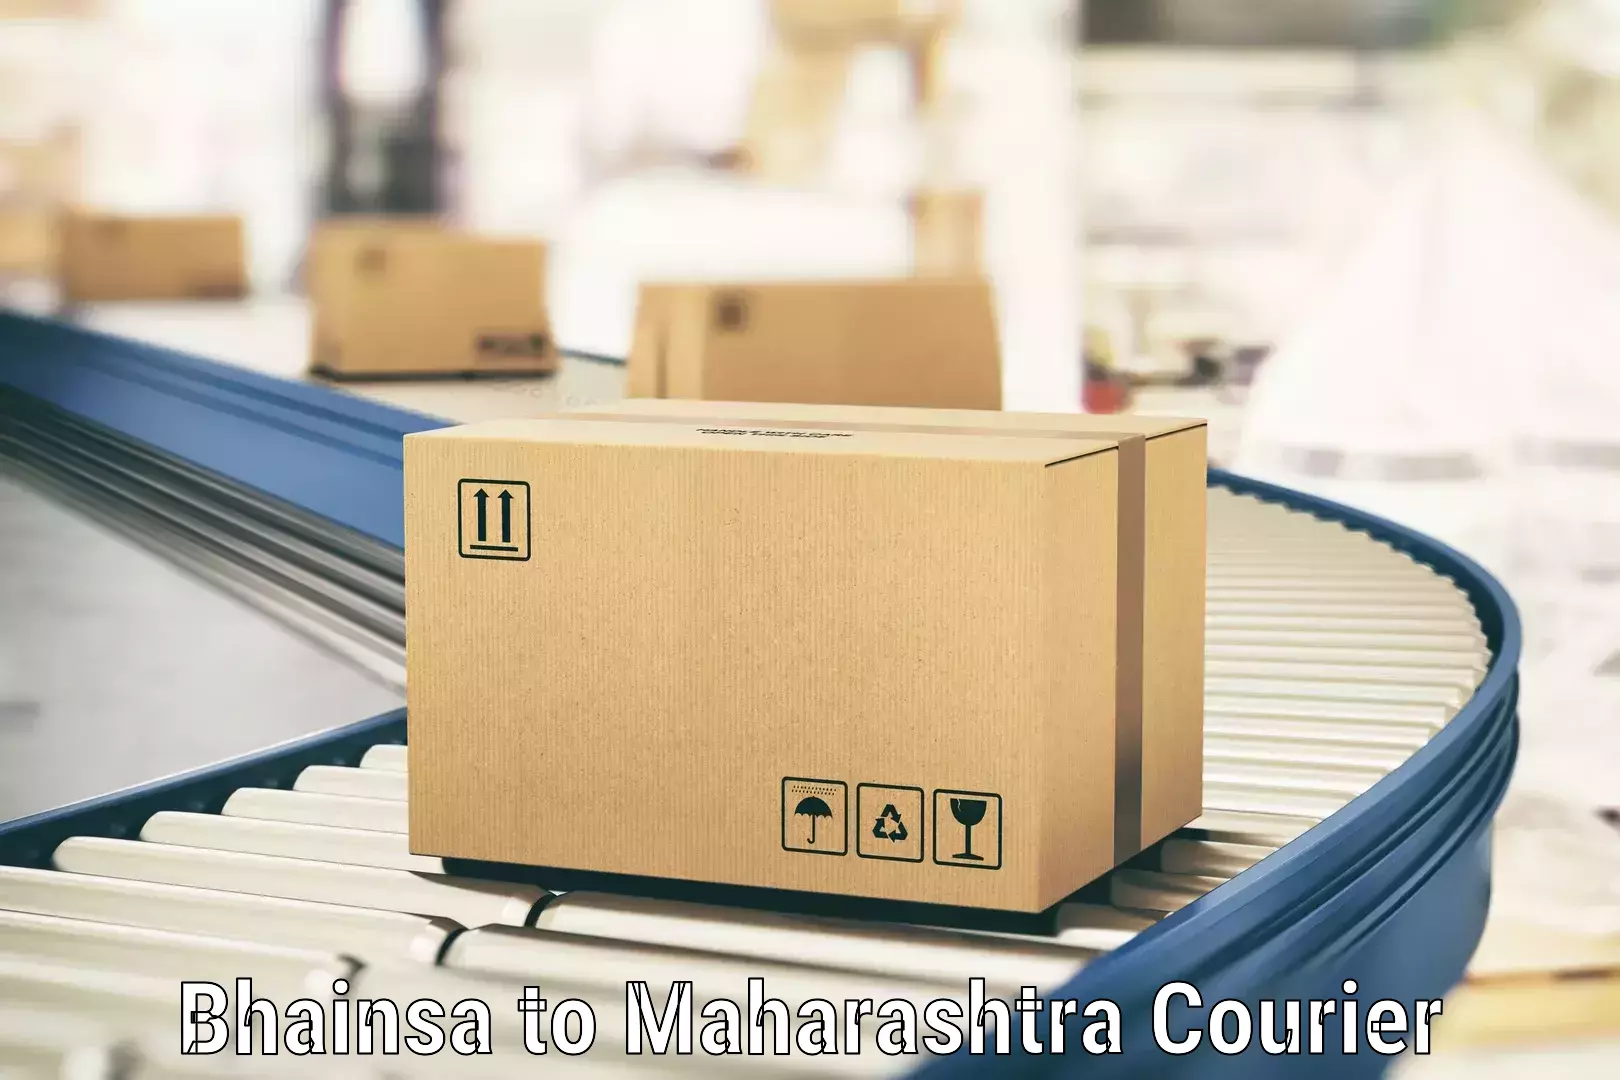 Flexible delivery schedules Bhainsa to Chandrapur